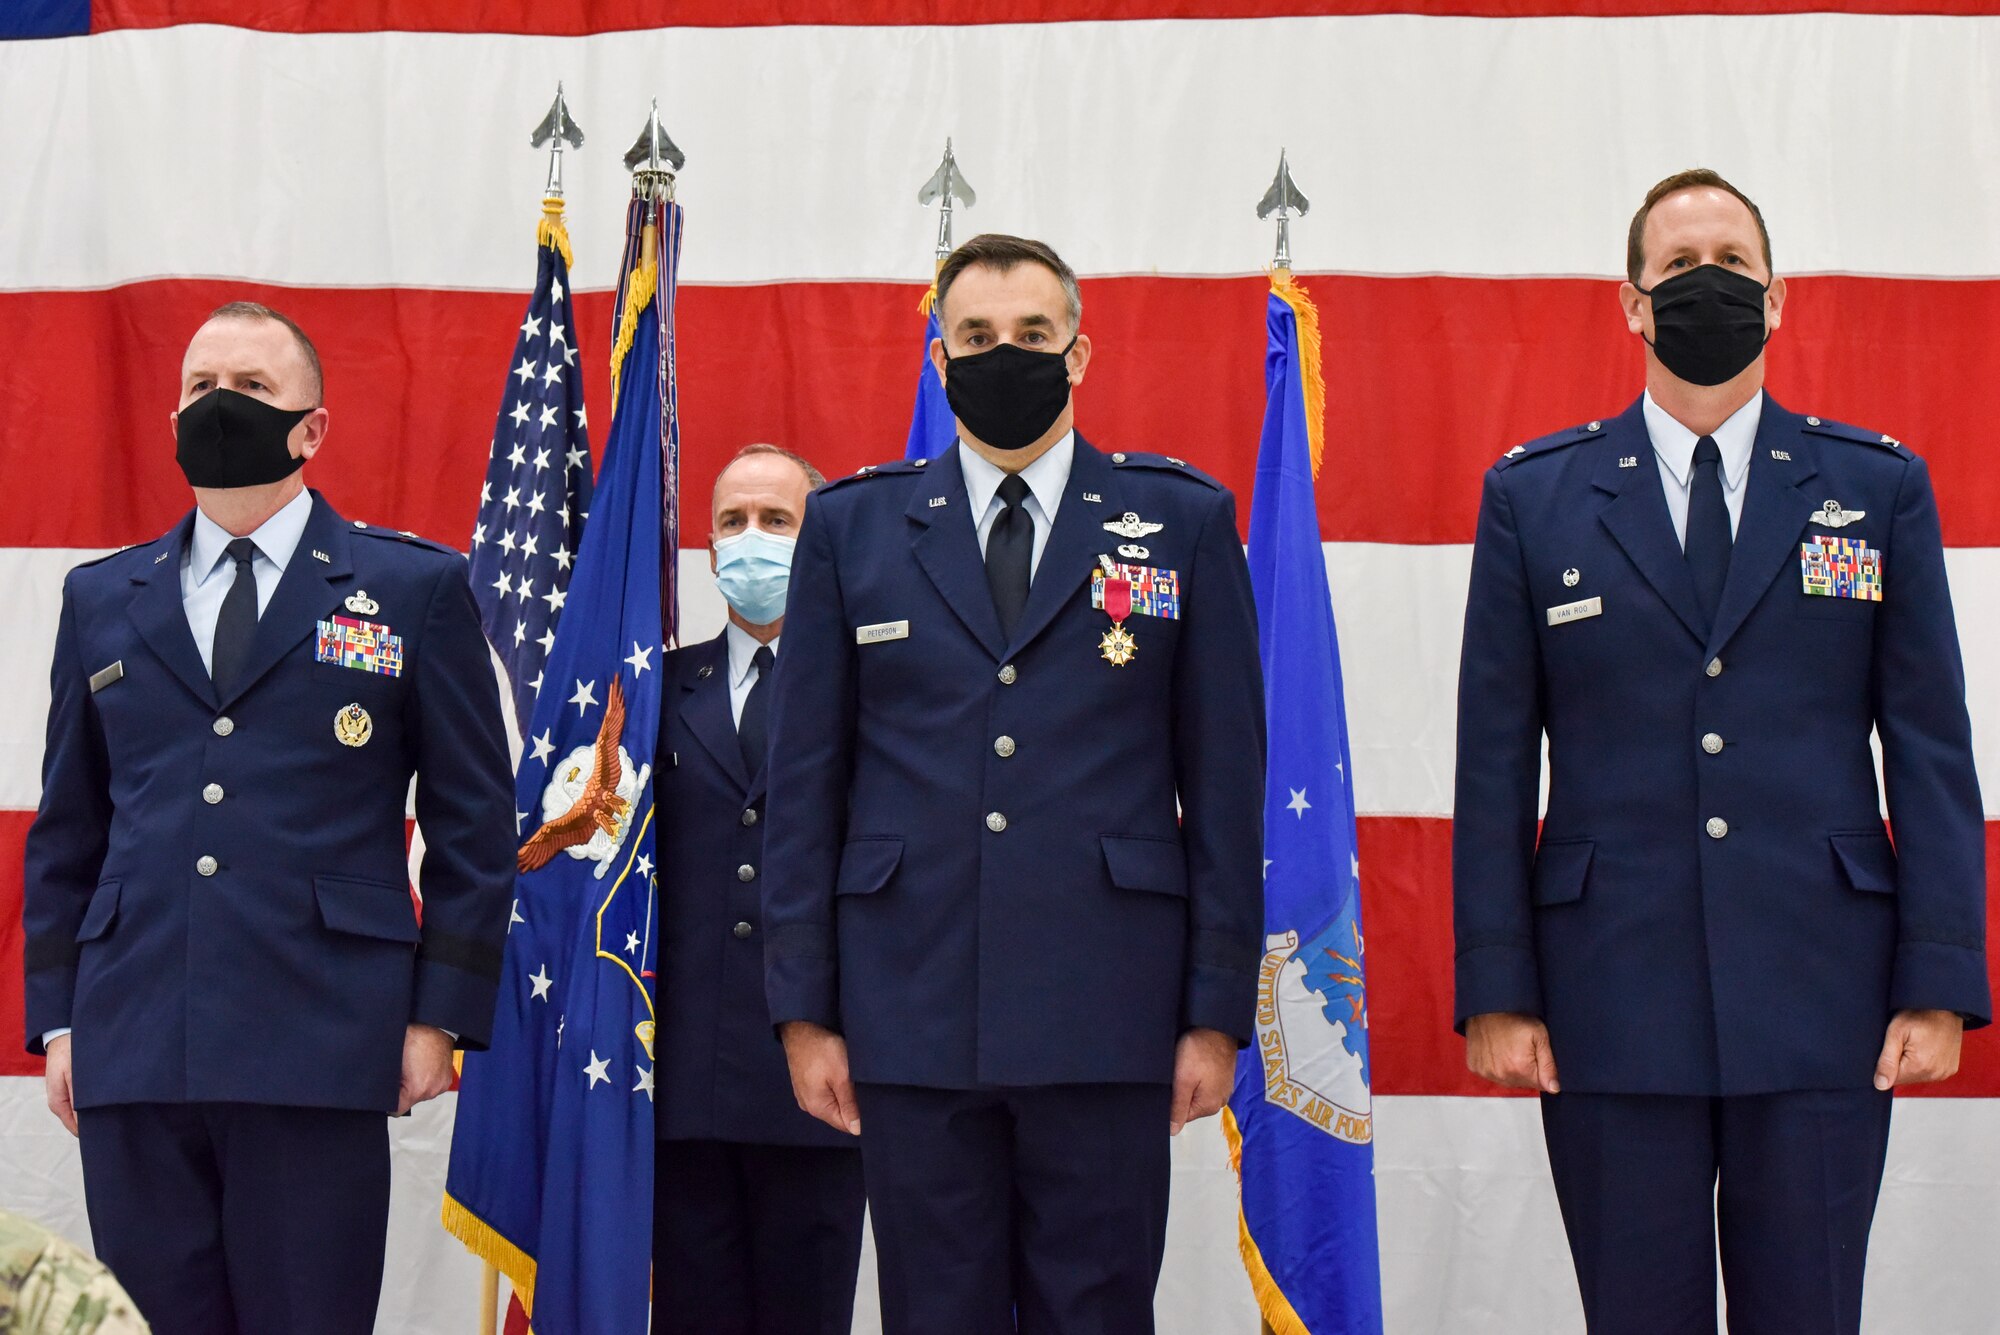 Brig. Gen. David May, Wisconsin’s deputy adjutant general for Air, Command Chief Master Sergeant James McKay, 115th Fighter Wing Command Chief, Brig. Gen. Erik Peterson, Chief of Staff, Wisconsin Air National Guard and Col. Bart Van Roo, 115th Fighter Wing commander stand-by prior to the passing of the unit flag as part of the official change of command ceremony in an aircraft hangar at the 115th Fighter Wing, Madison, Wis., Oct 3, 2020. Col. Bart Van Roo assumed command of the 115th Fighter Wing from Brig. Gen. Erik Peterson. (U.S. Air National Guard Photo by Tech. Sgt. Mary Greenwood)